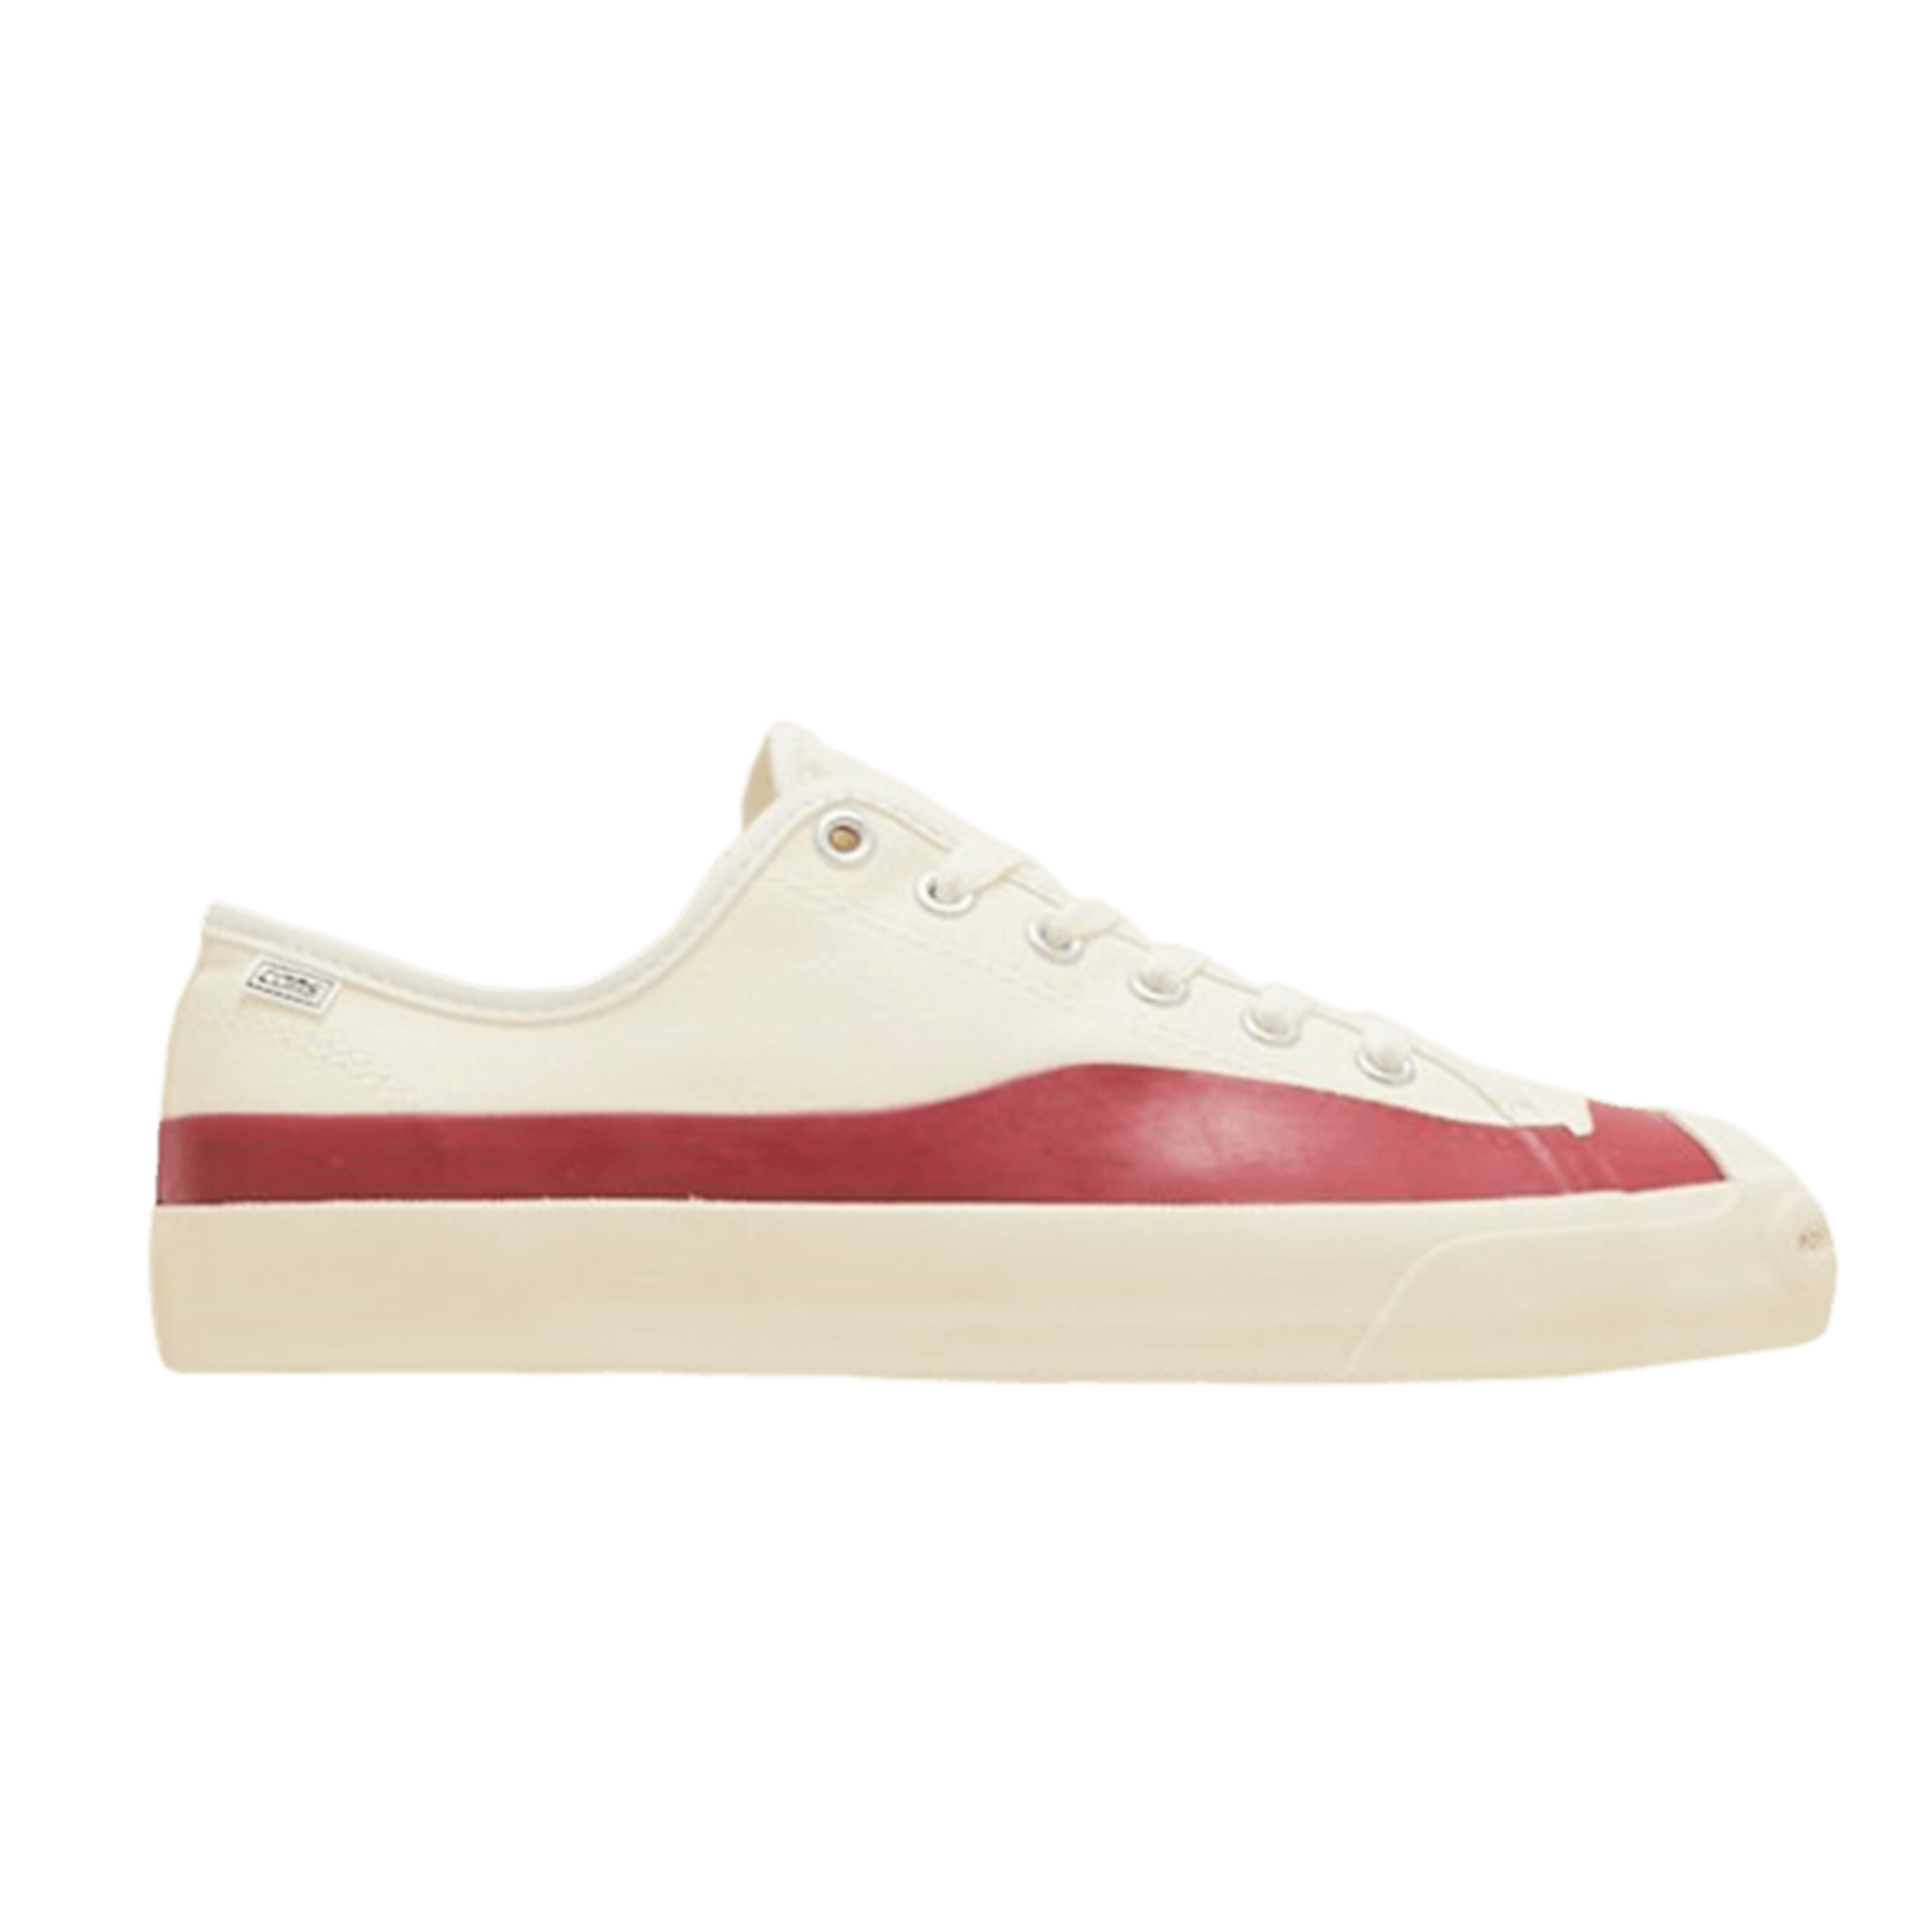 Converse Pop Trading Company x Jack Purcell Pro Low 'Egret Red'